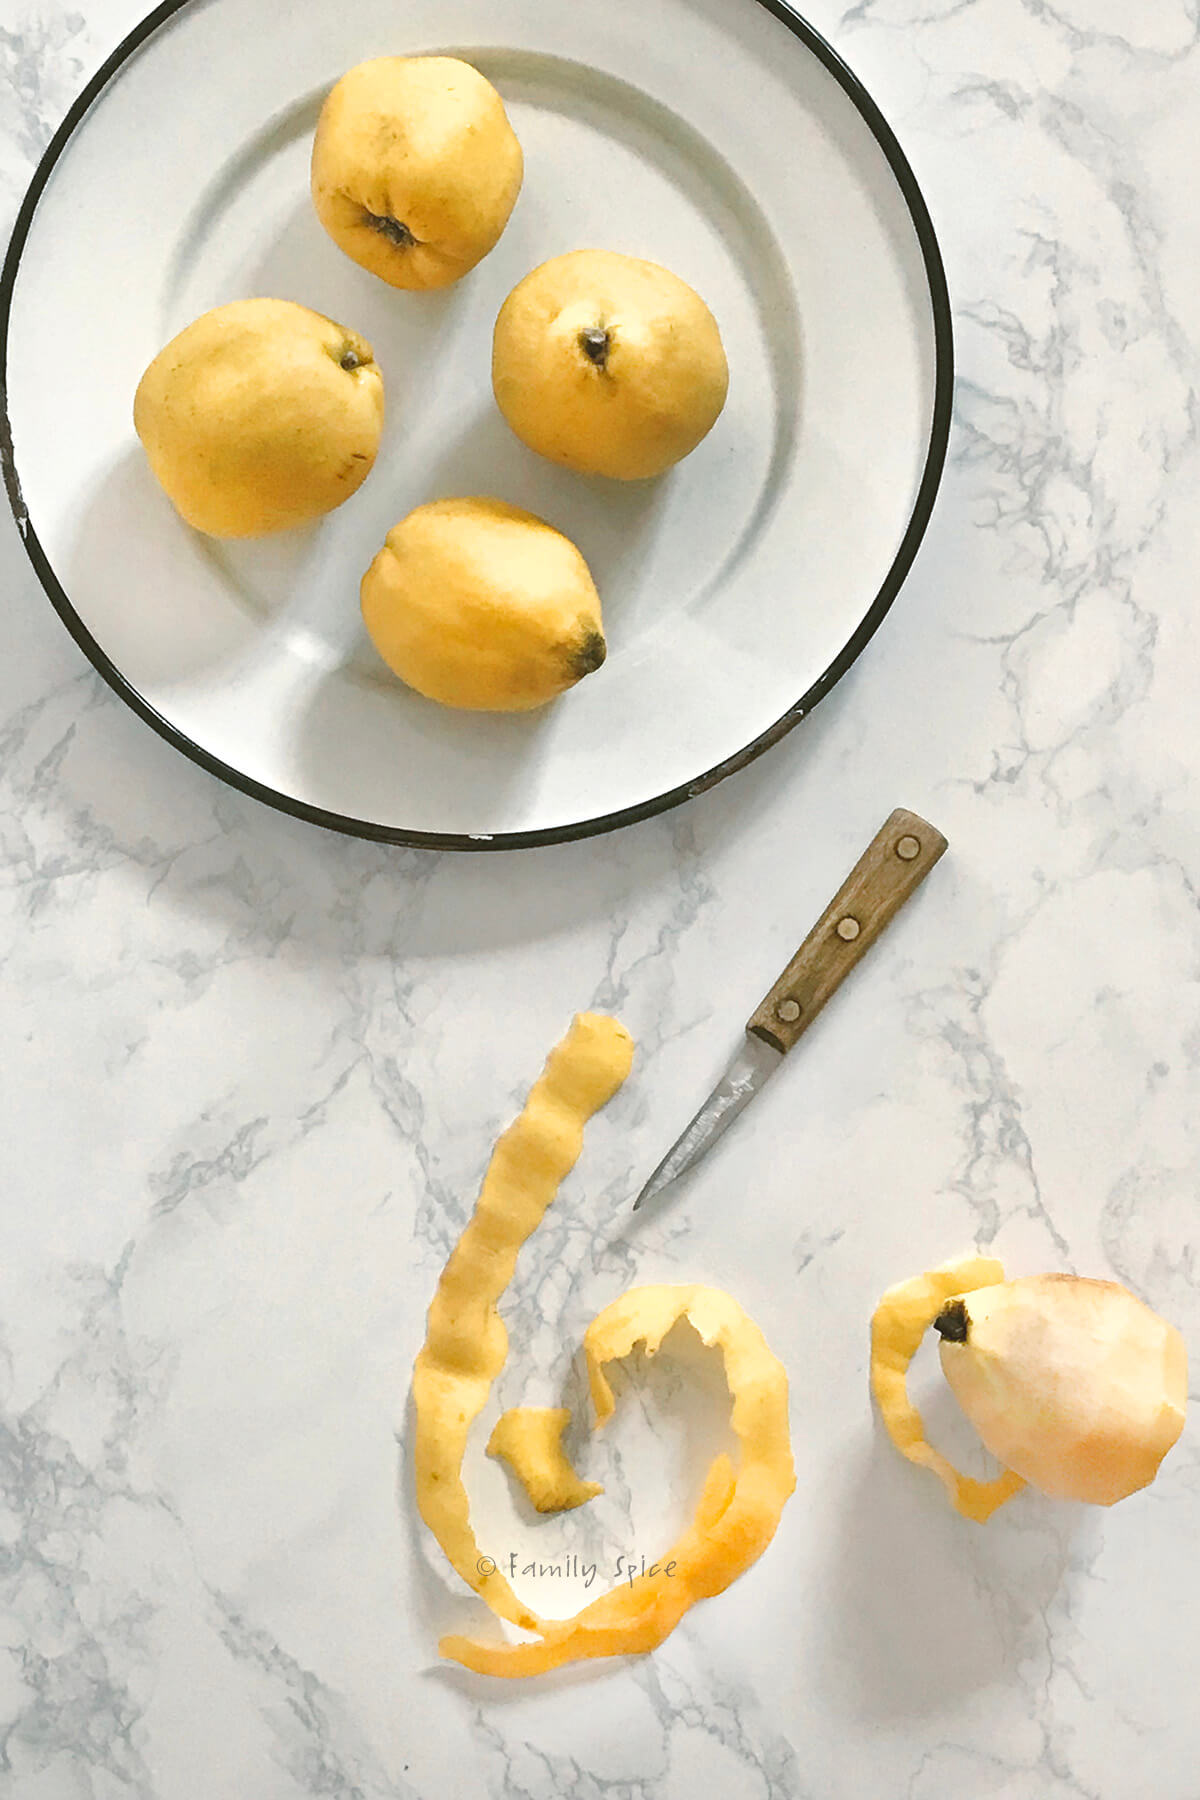 A platter of quince with a pairing knife and peeled quince